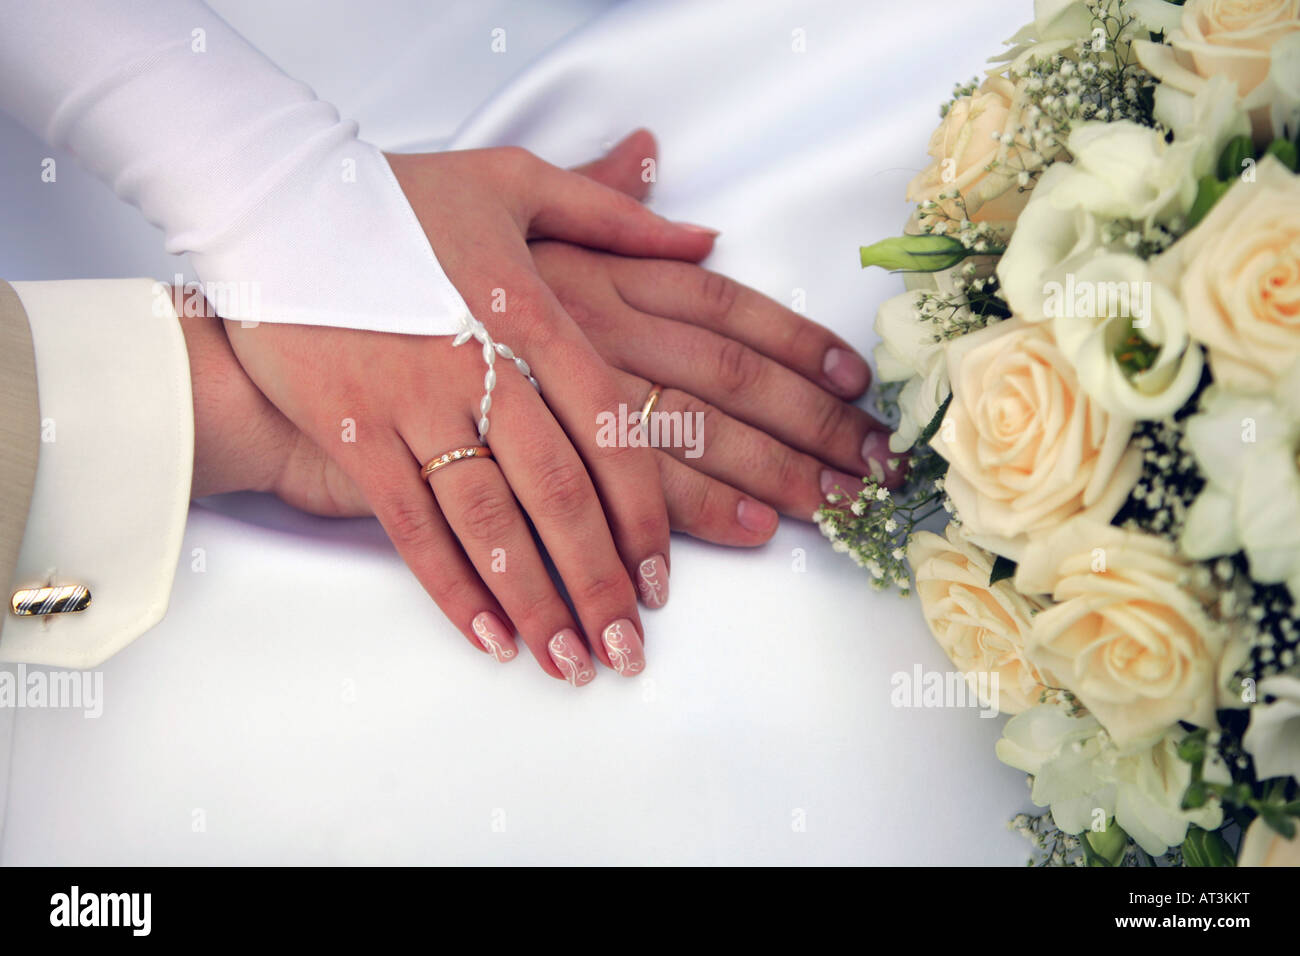 A portrait of a bride holding her hand on her new husbands to show their wedding rings off Stock Photo